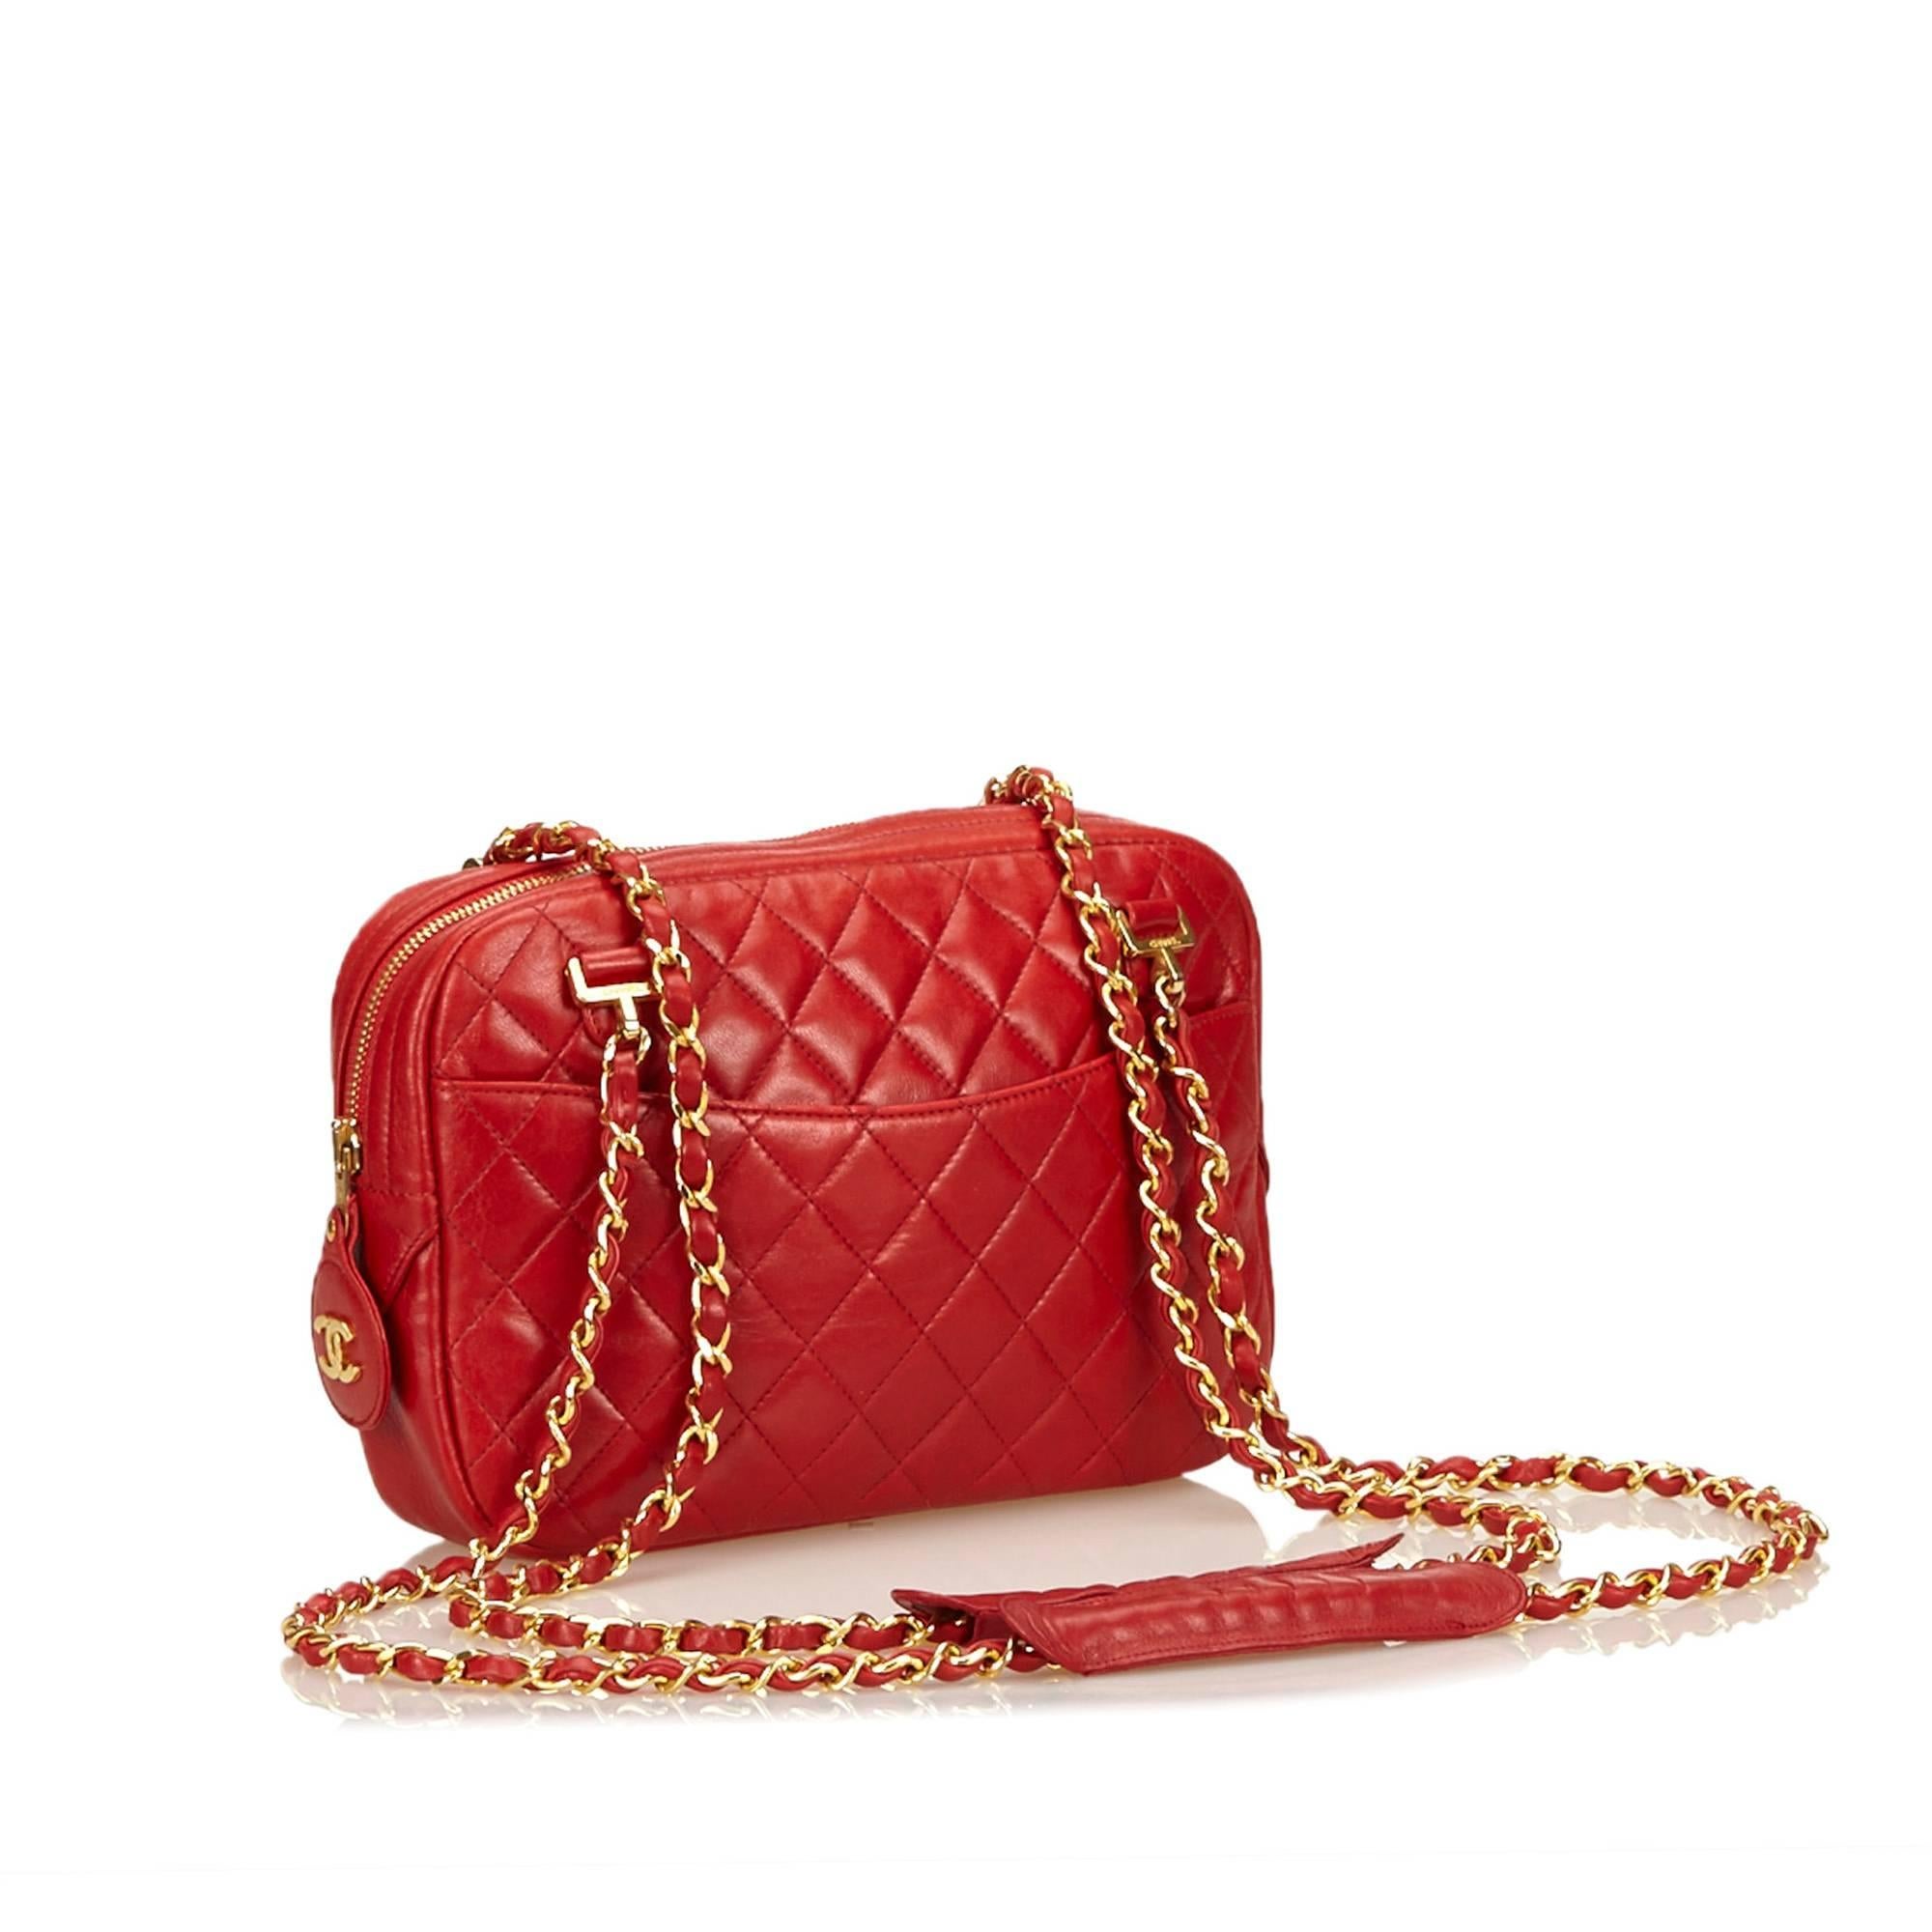 Women's Red Chanel Quilted Lambskin Shoulder Bag